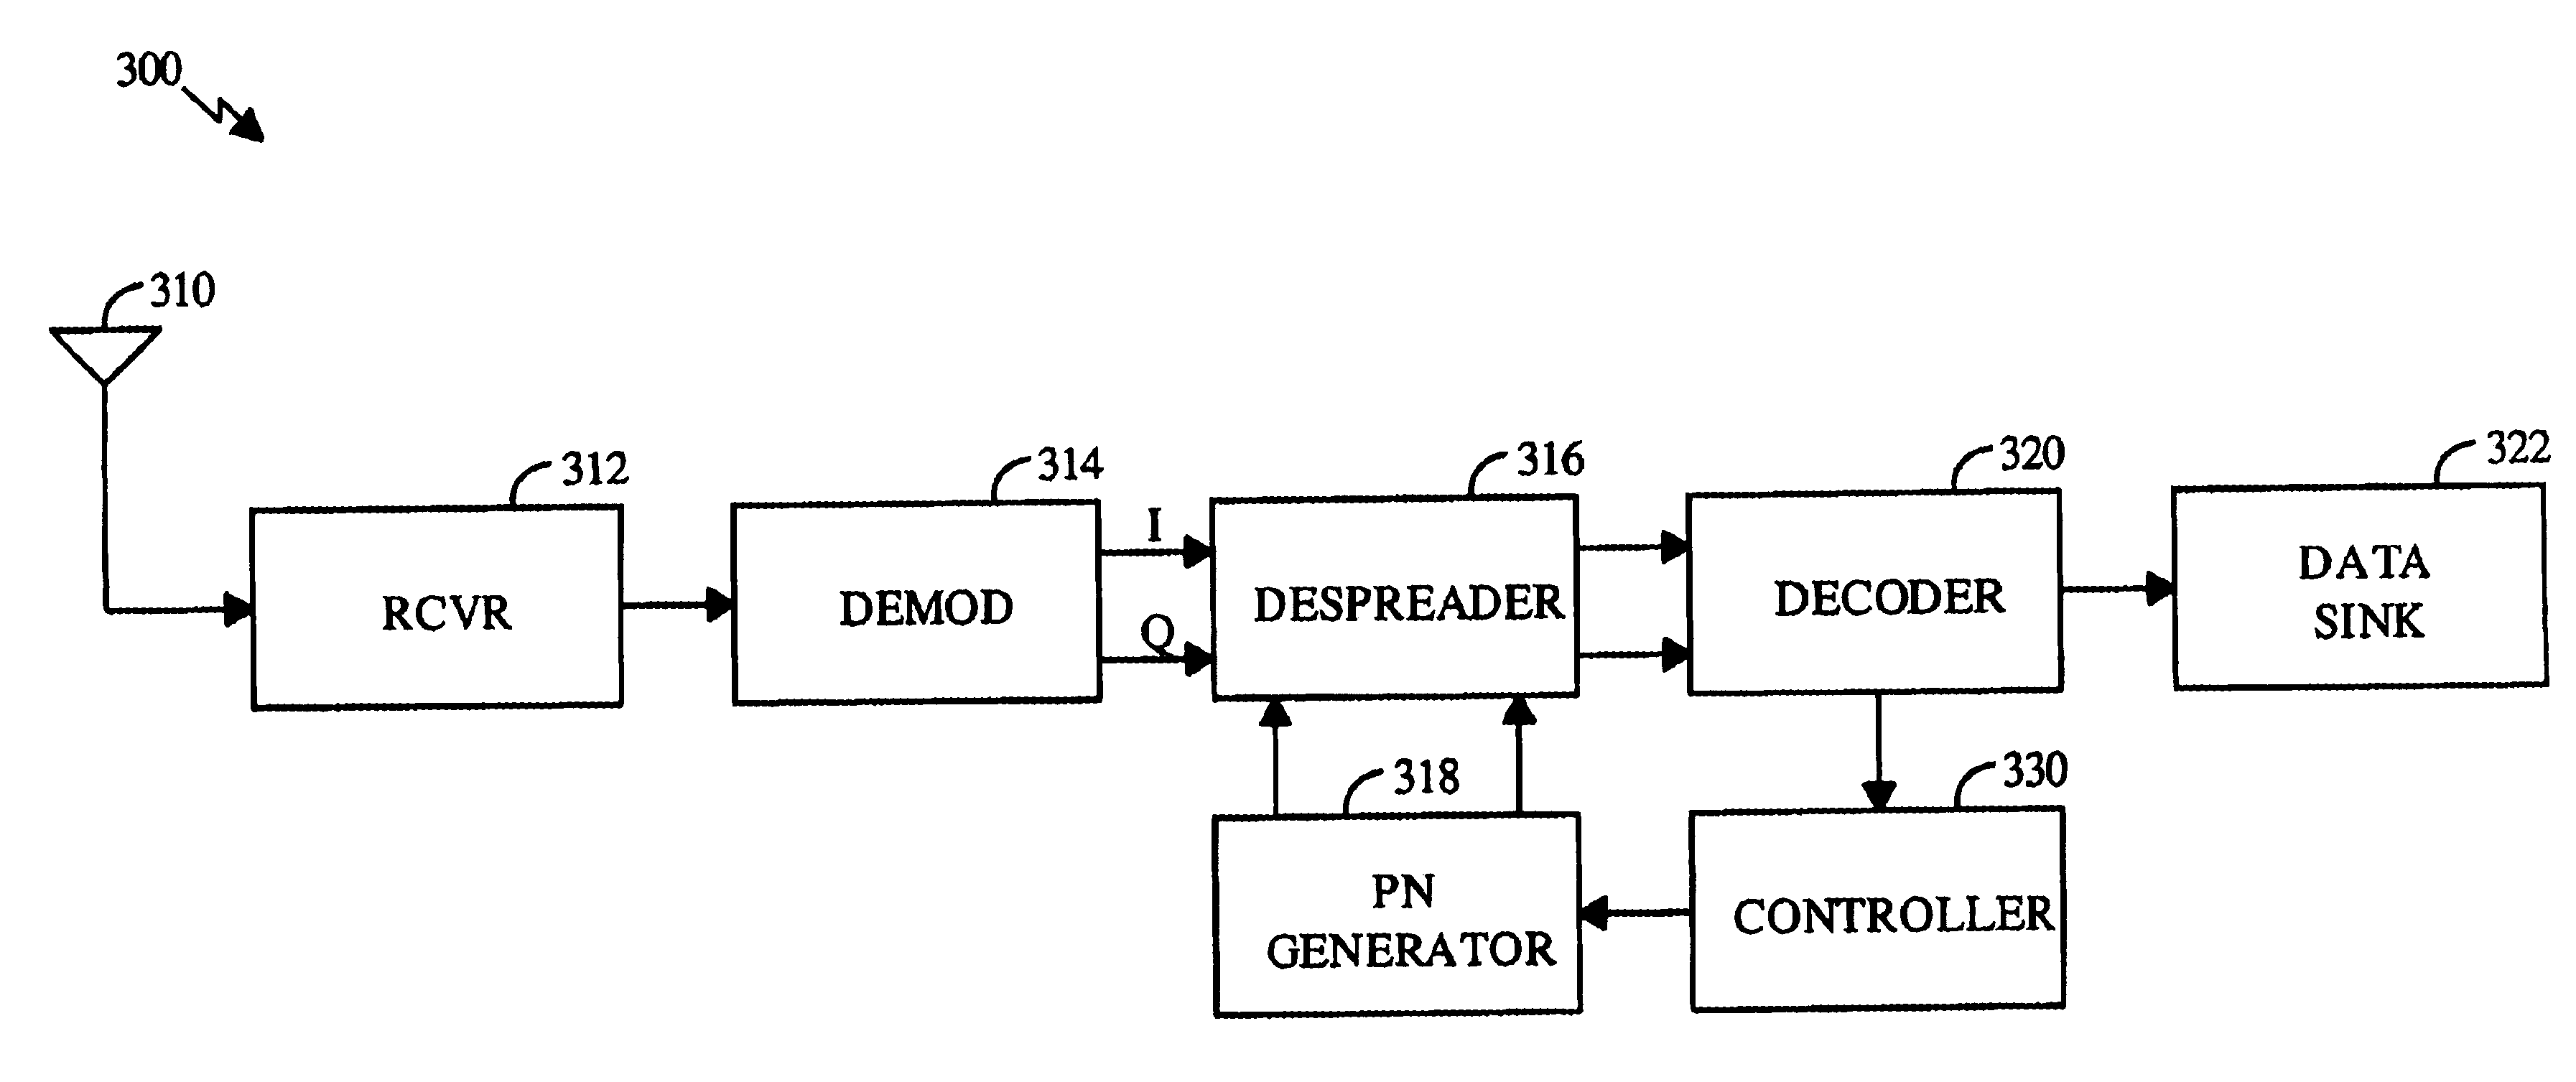 PN generators for spread spectrum communications systems